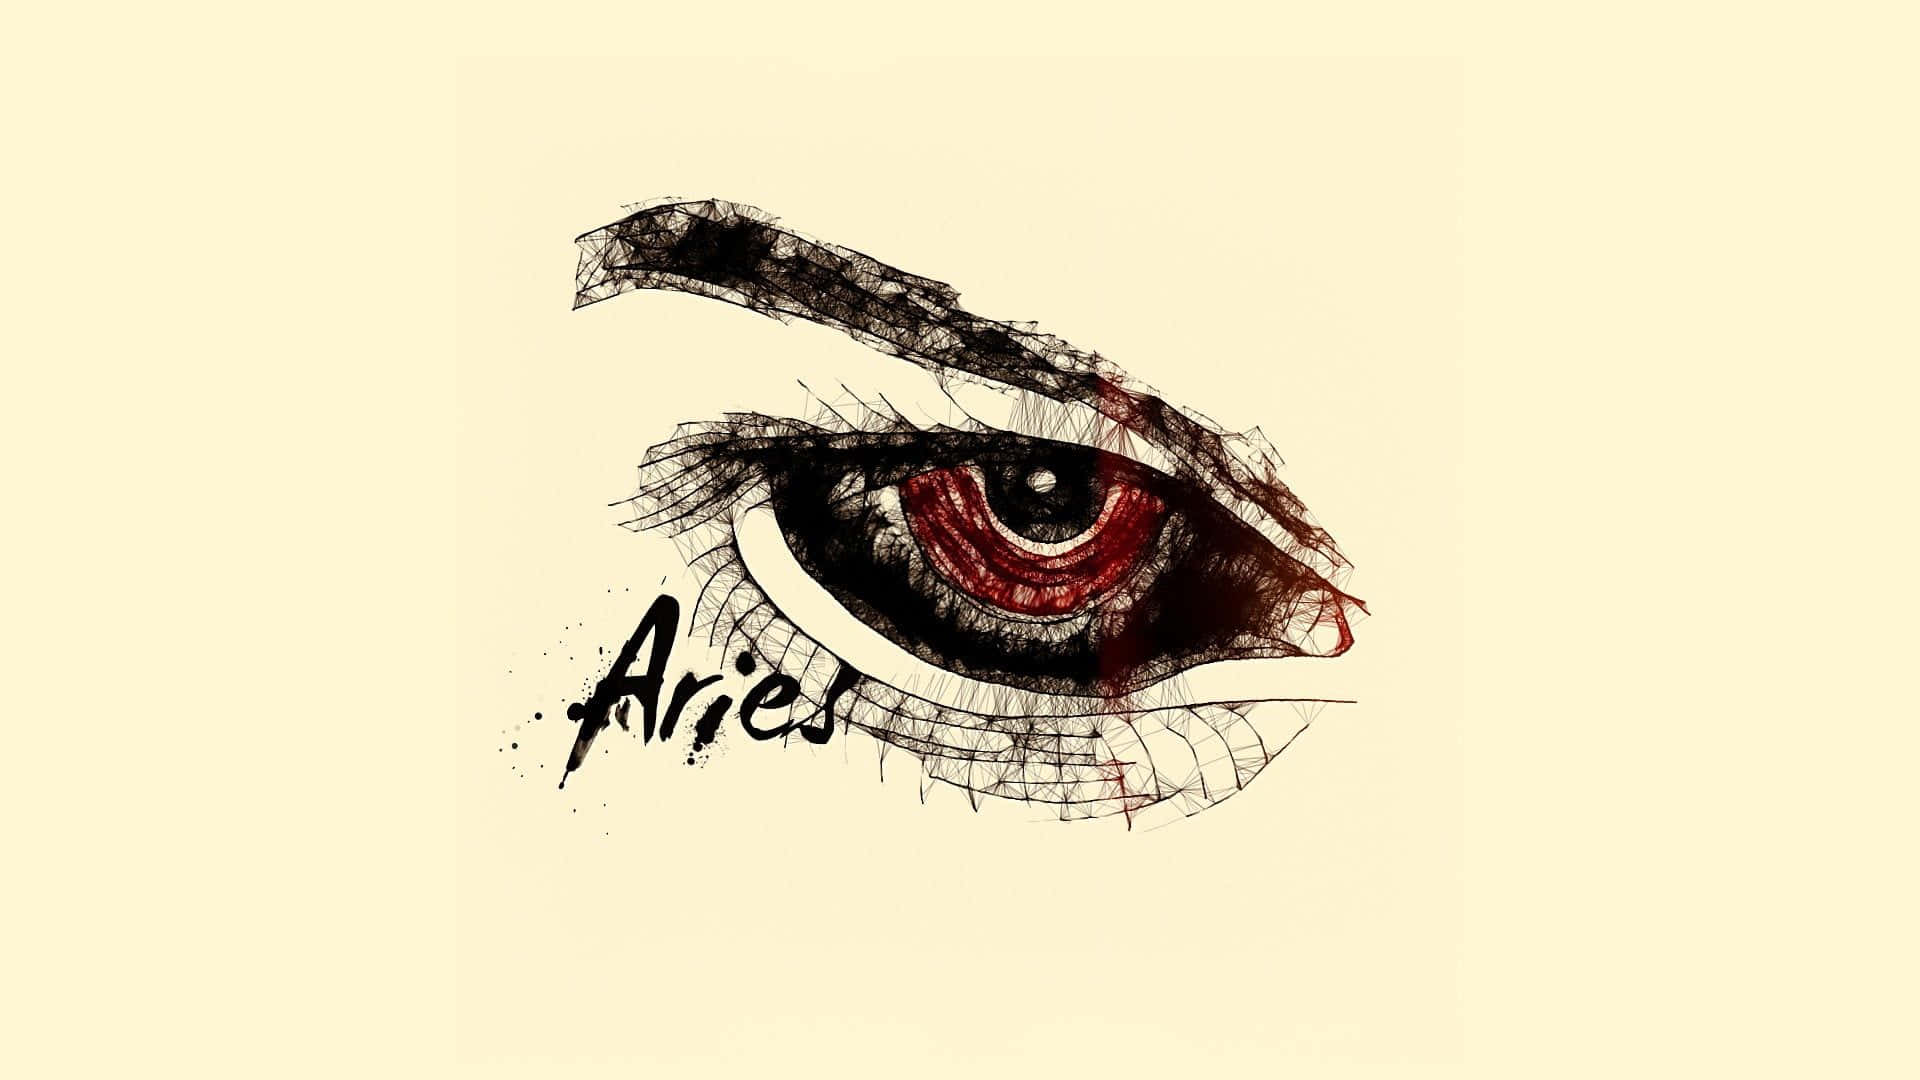 Aries, the first sign of the zodiac and a symbol of strength, courage and leadership.